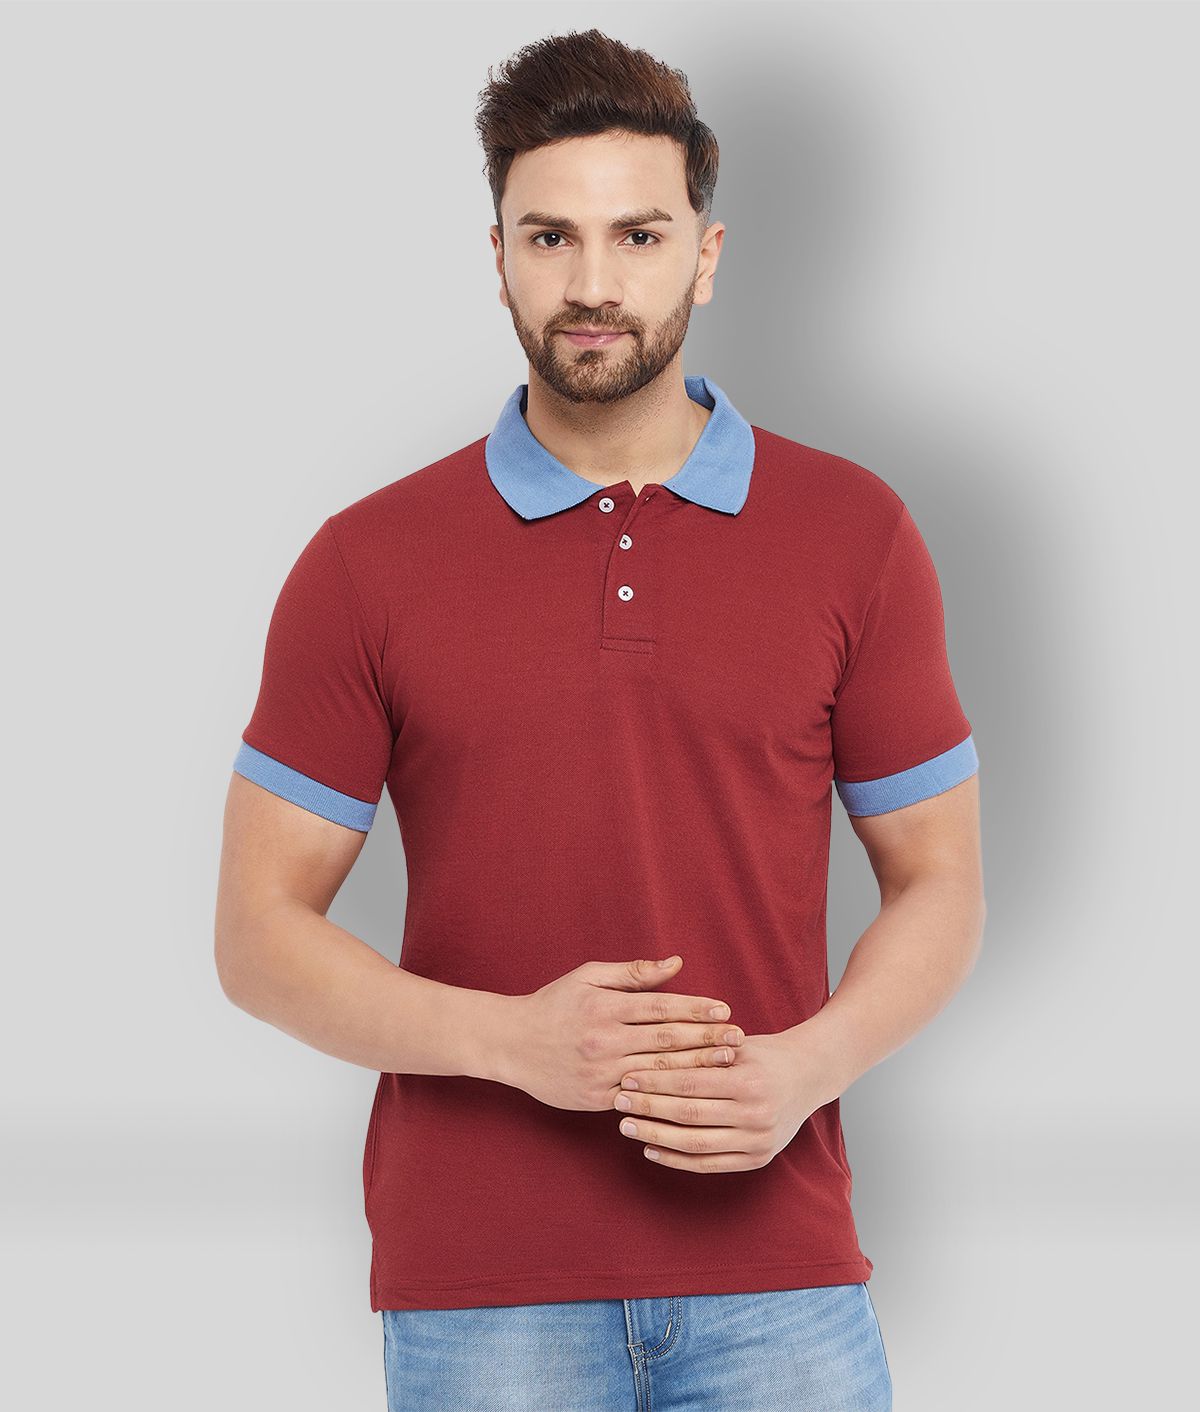     			The Million Club - Maroon Cotton Blend Regular Fit Men's Polo T Shirt ( Pack of 1 )